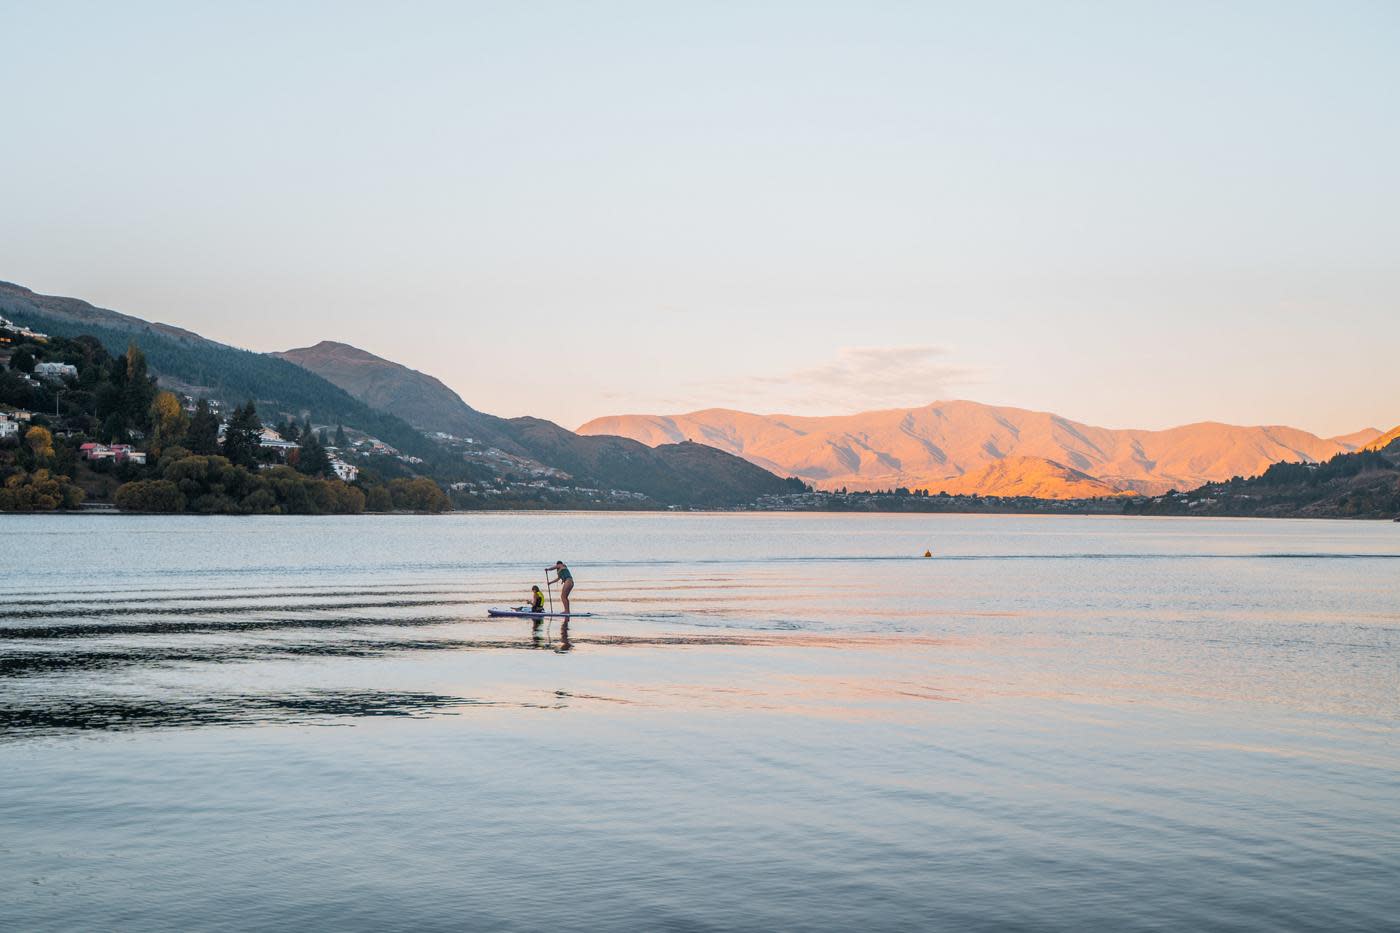 Paddleboarders in the middle of the lake at dusk